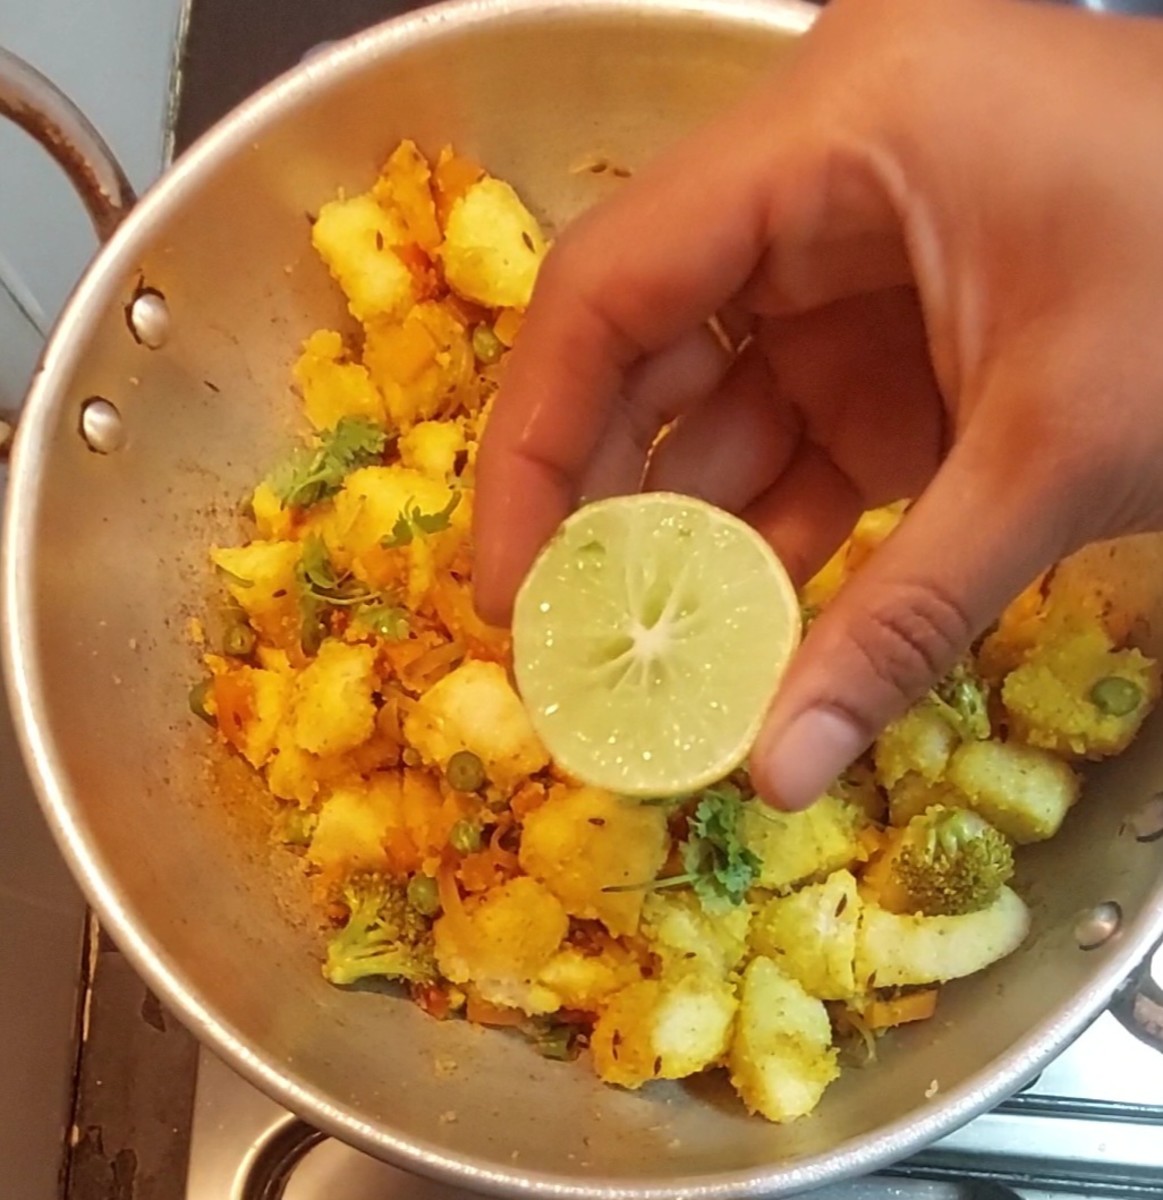 Add 2 tablespoons chopped coriander leaves, add juice of 1/2 lemon. Mix well and switch off the flame.